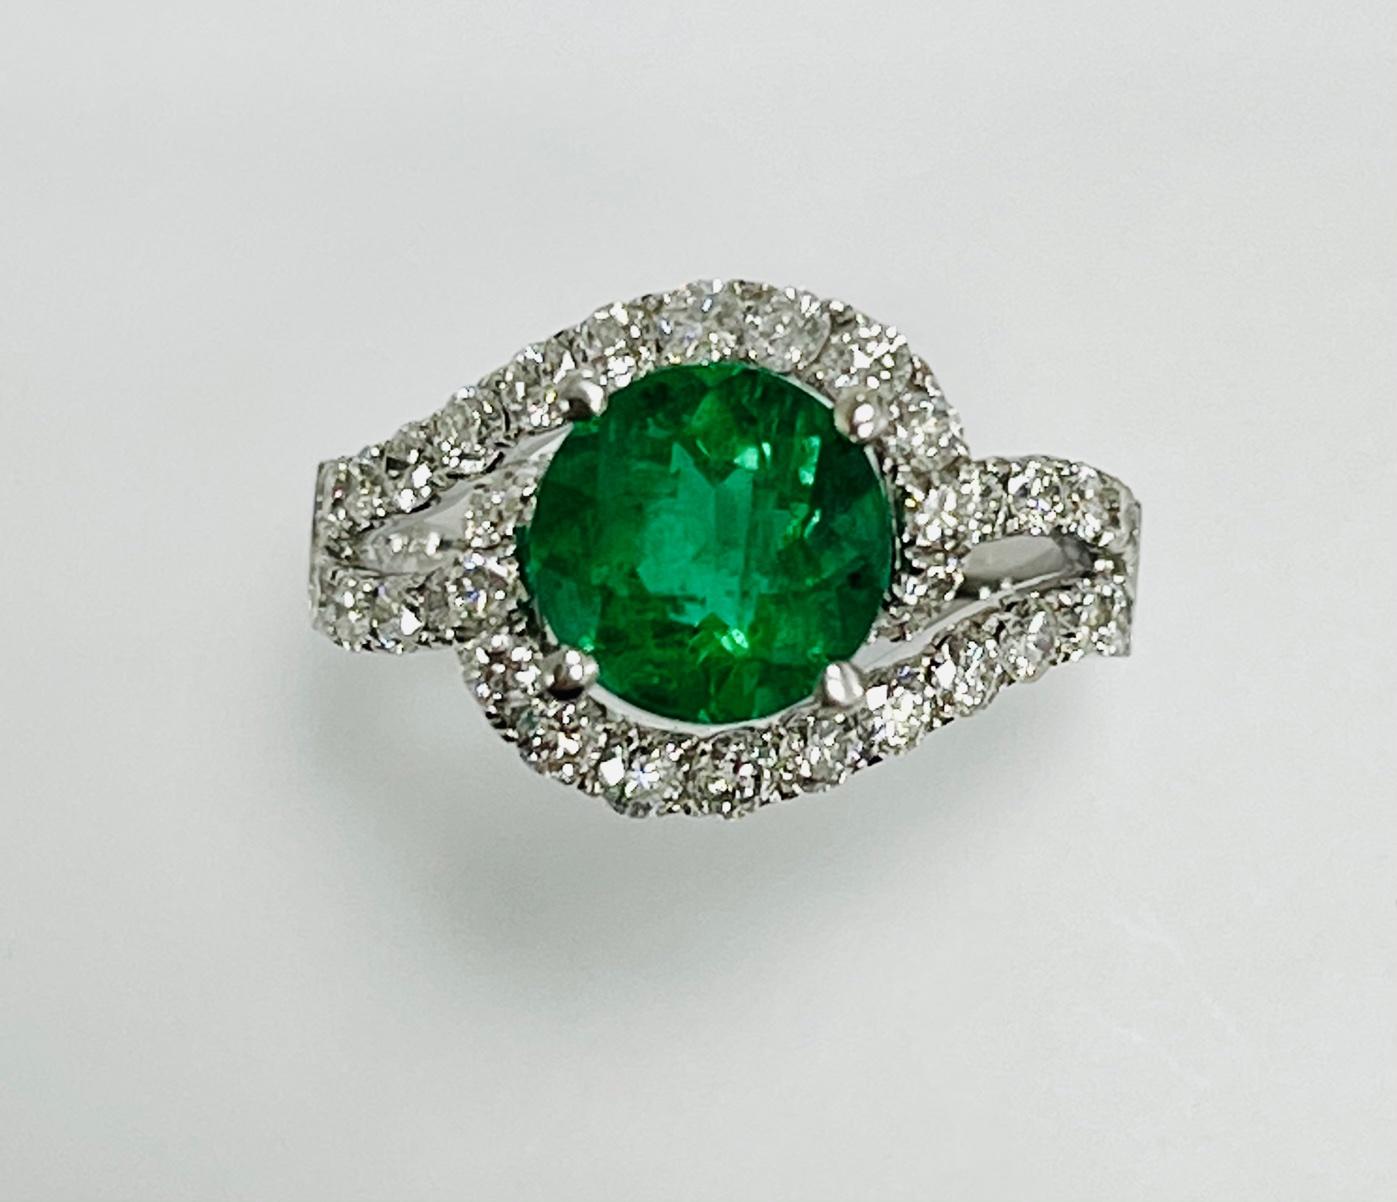 1.88 Carat zambian round shape emerald set in 18k whit gold ring with 1.21 carat diamonds around it and half way on the split shank .